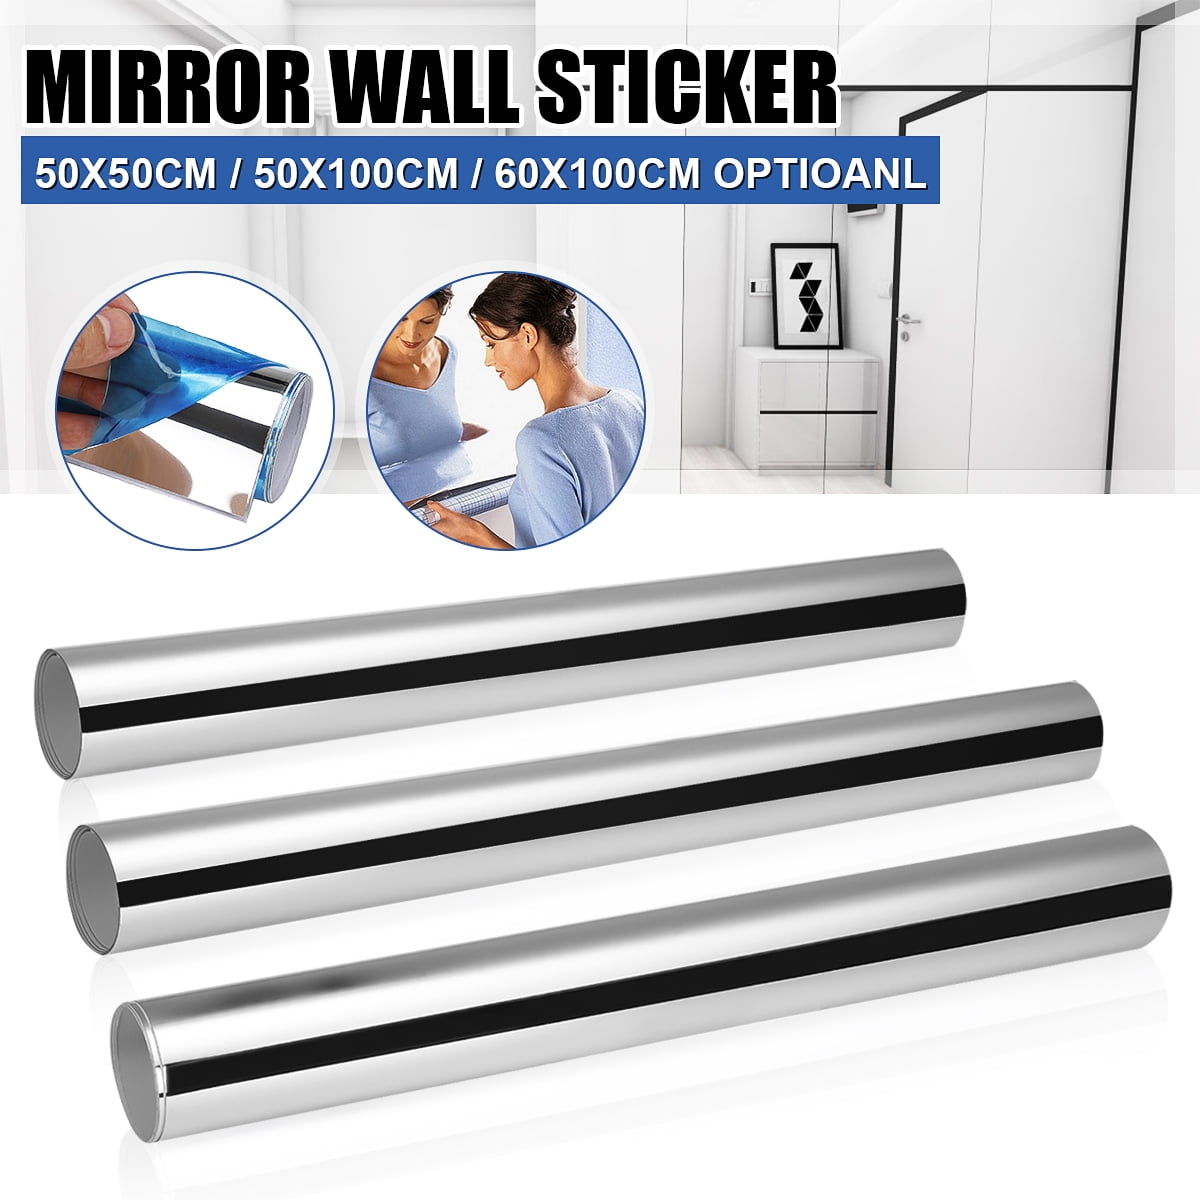 WALL MIRROR TILES ANTI SHATTER SAFETY ACRYLIC SHEET ADHESIVE STICK ON MOUNTED 